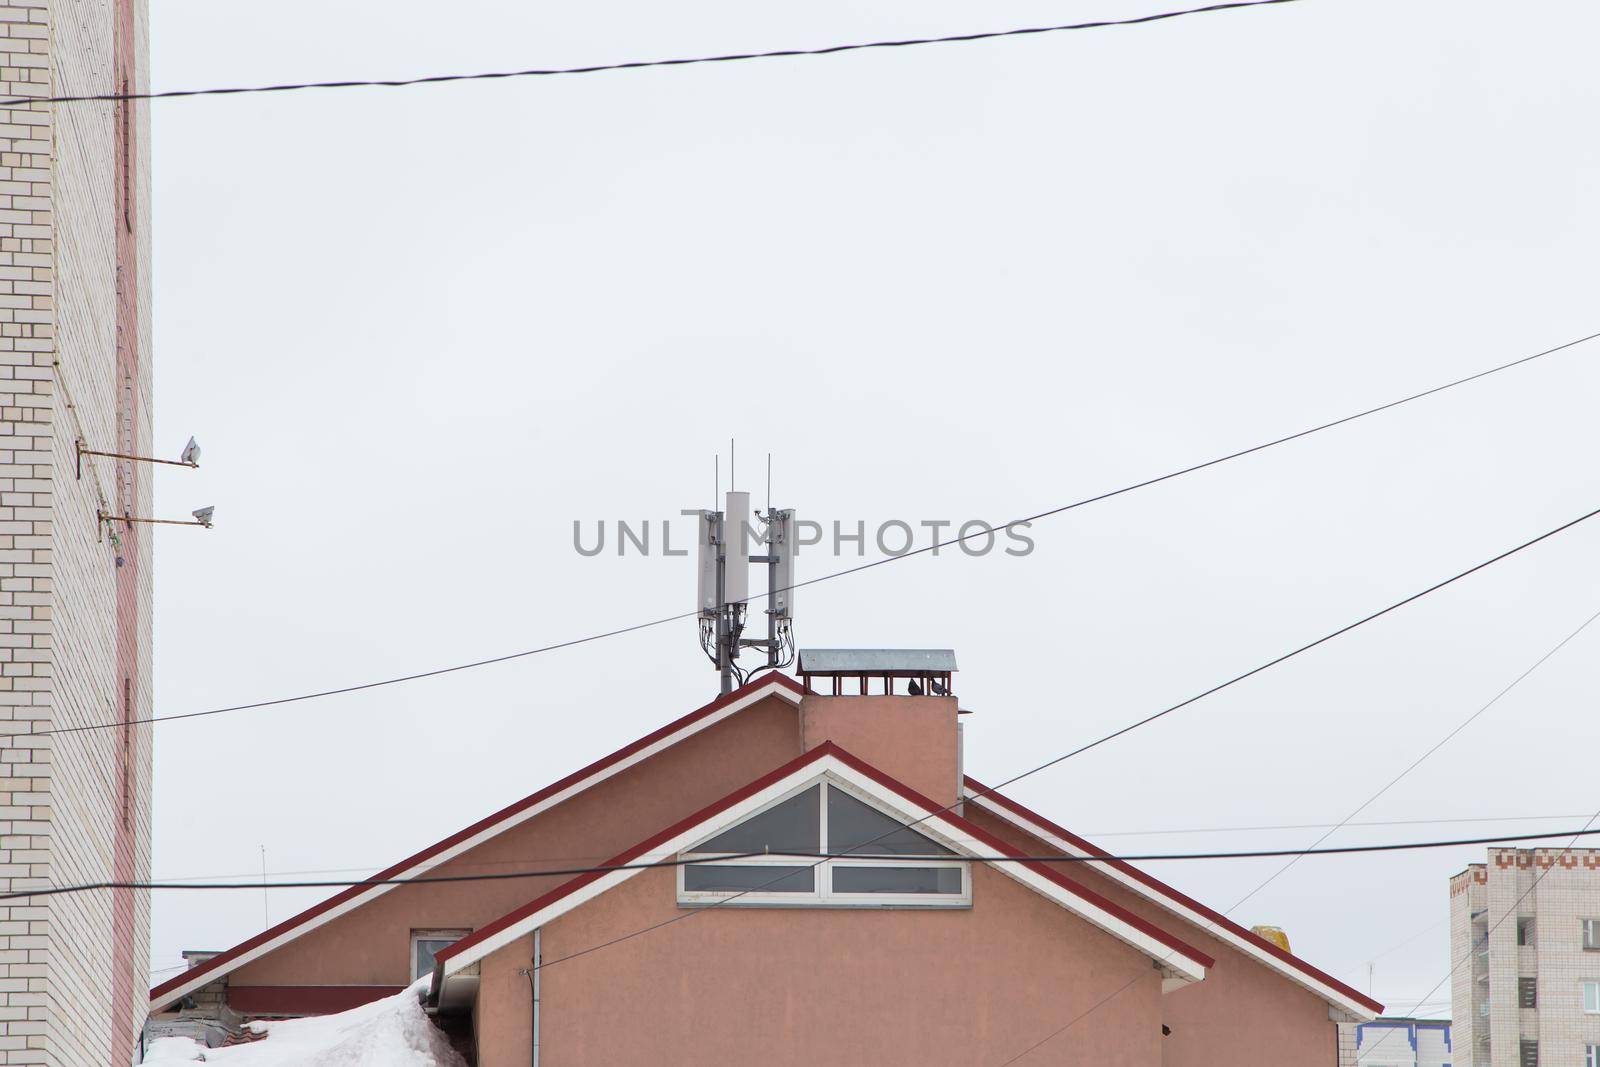 Telecommunication antenna next to a residential building. Cellular and telephone communications. Chimney against the gray sky. Electric wires are located in different places.